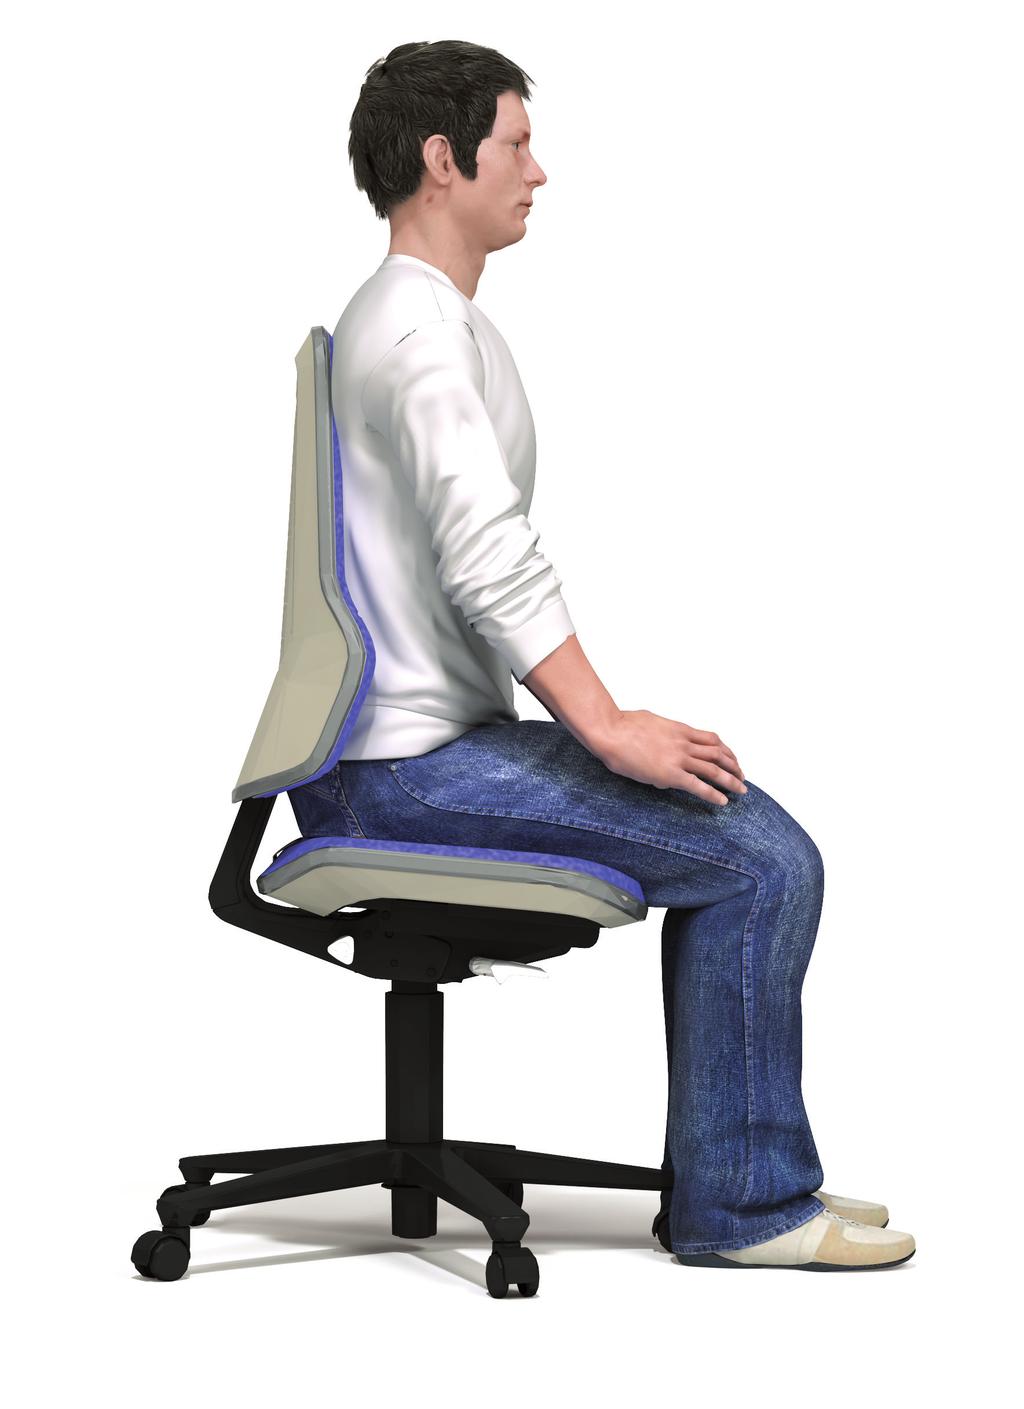 How to adjust your Sovella workplace chair Ergonomically sound chair is a vital part of a well-functioning, ergonomic and user-friendly workstation.